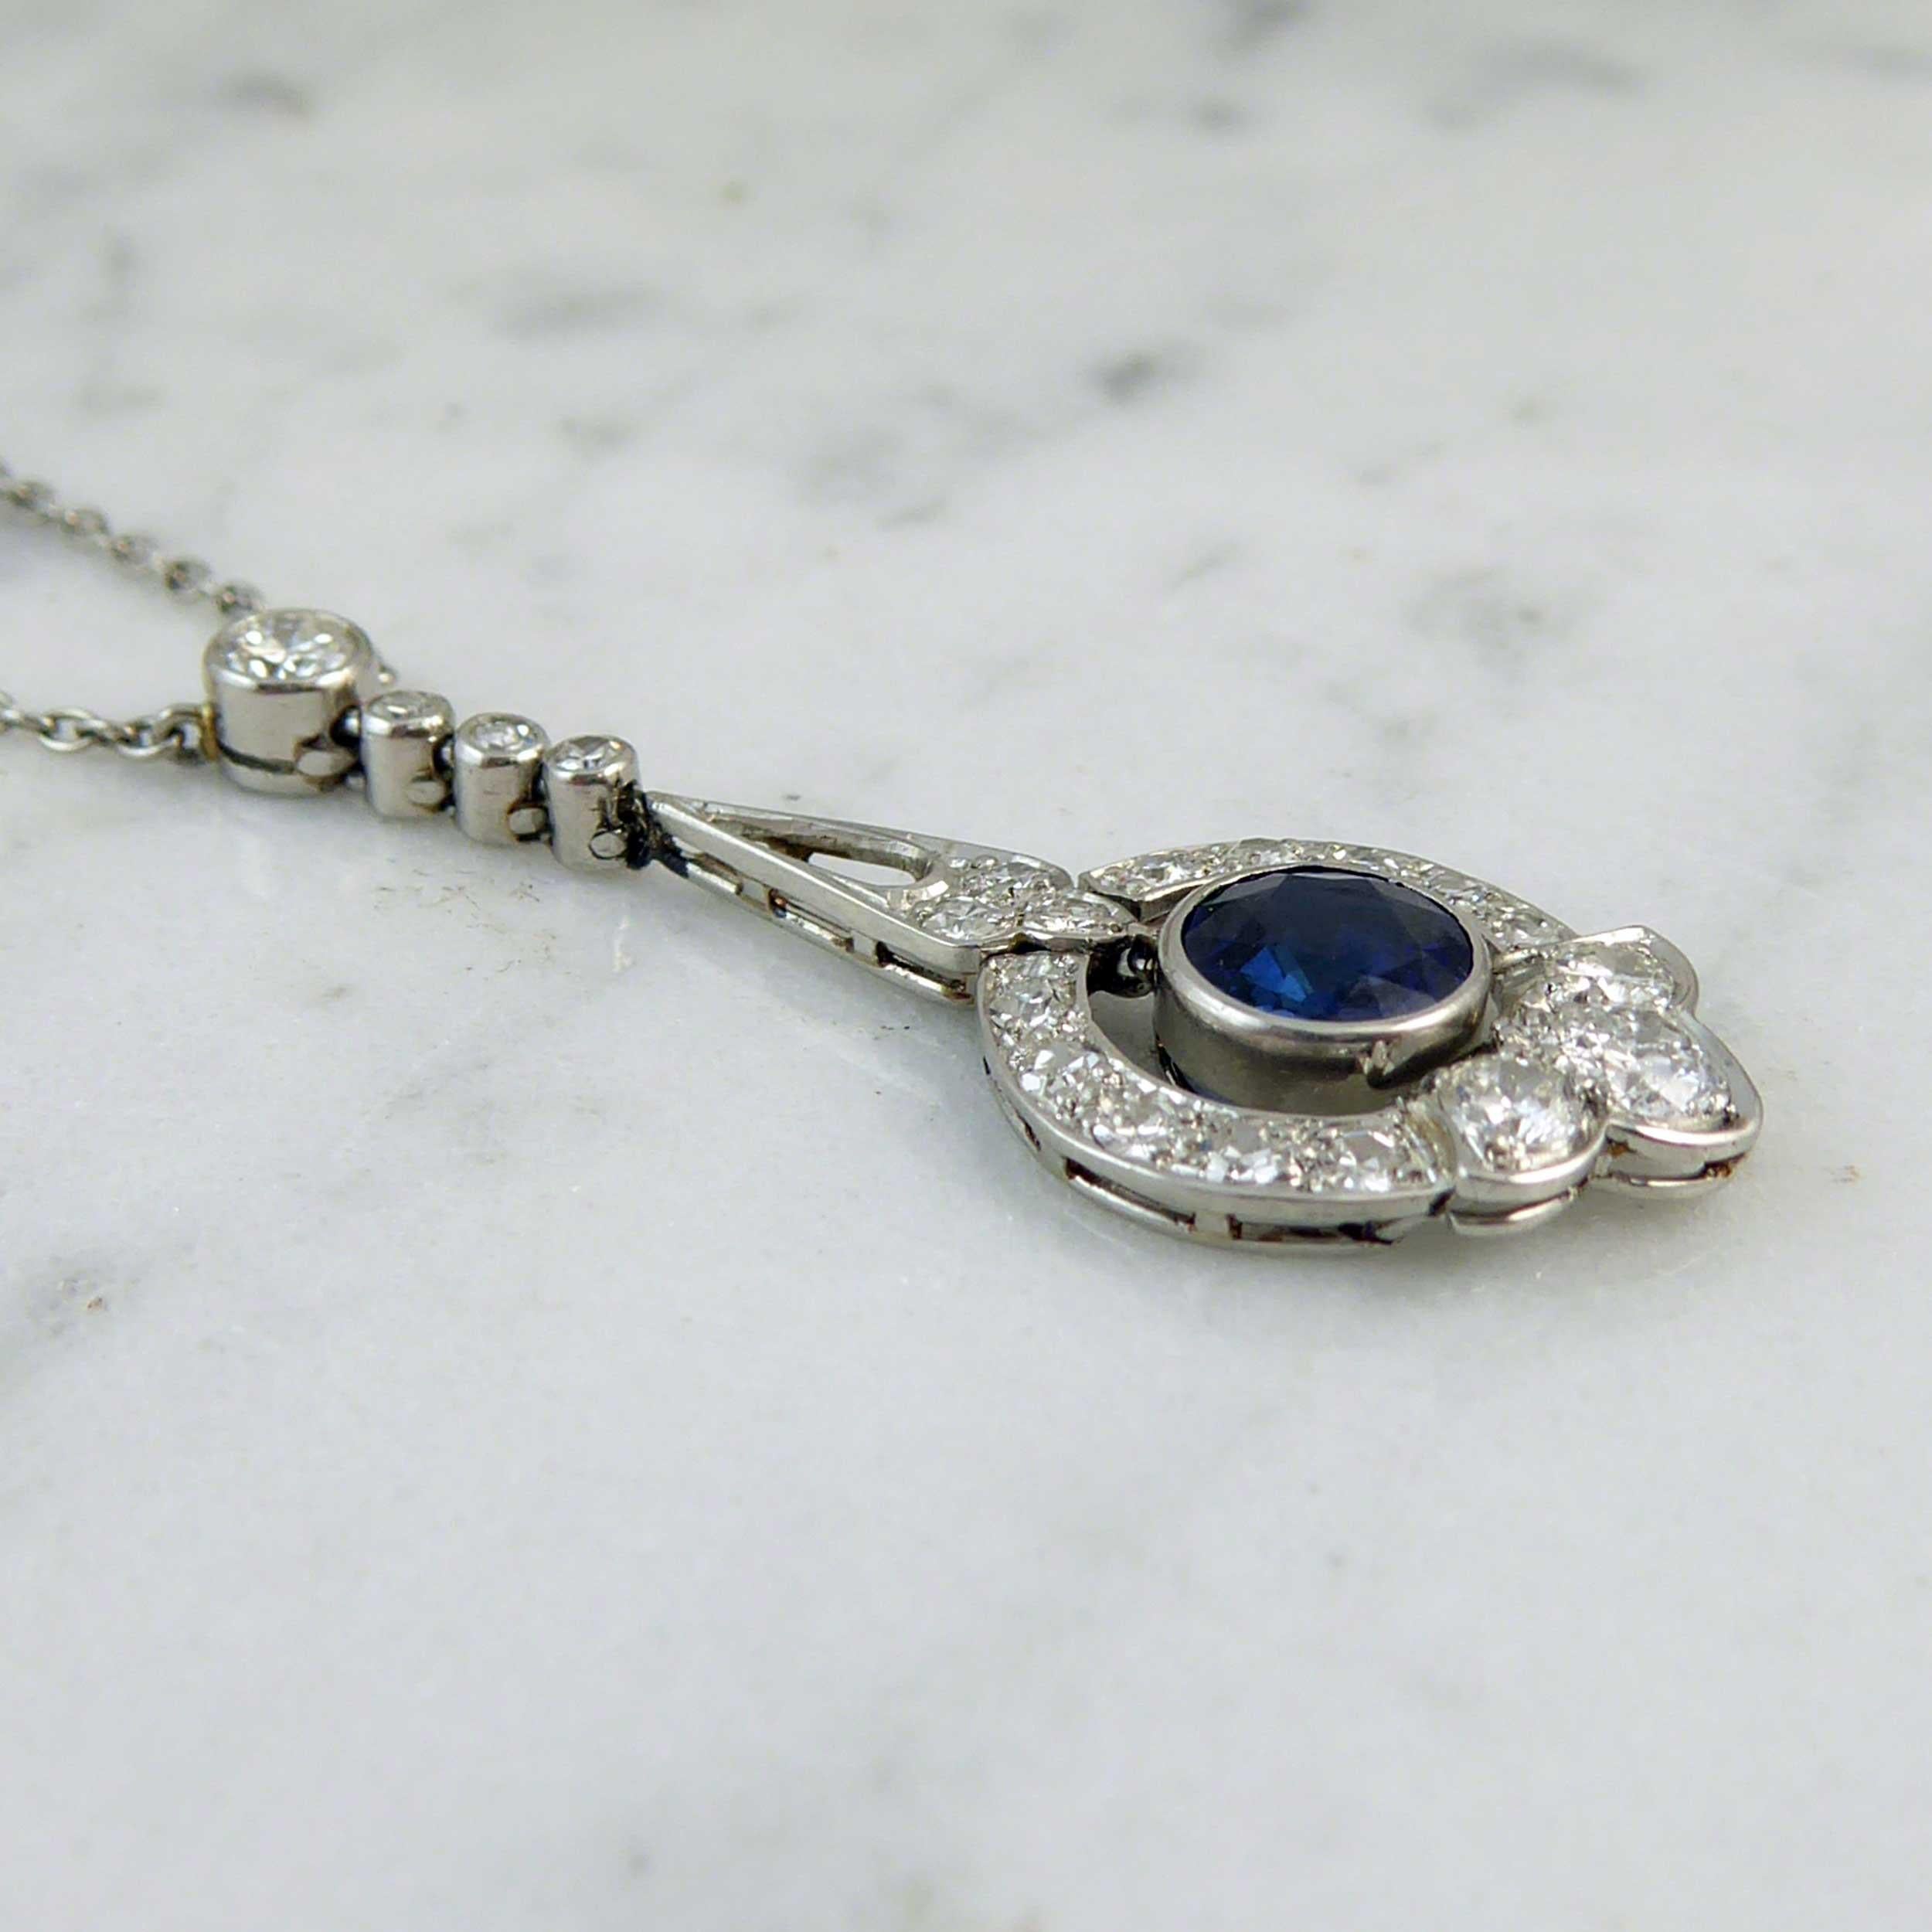 Art Deco necklace set with sapphire and diamonds comprising a round mixed cut blue sapphire articulating to the centre of a rectangular cross section wire hoop.  The hoop has a fleur-de-lys style base set with three brilliant cut diamonds whilst the